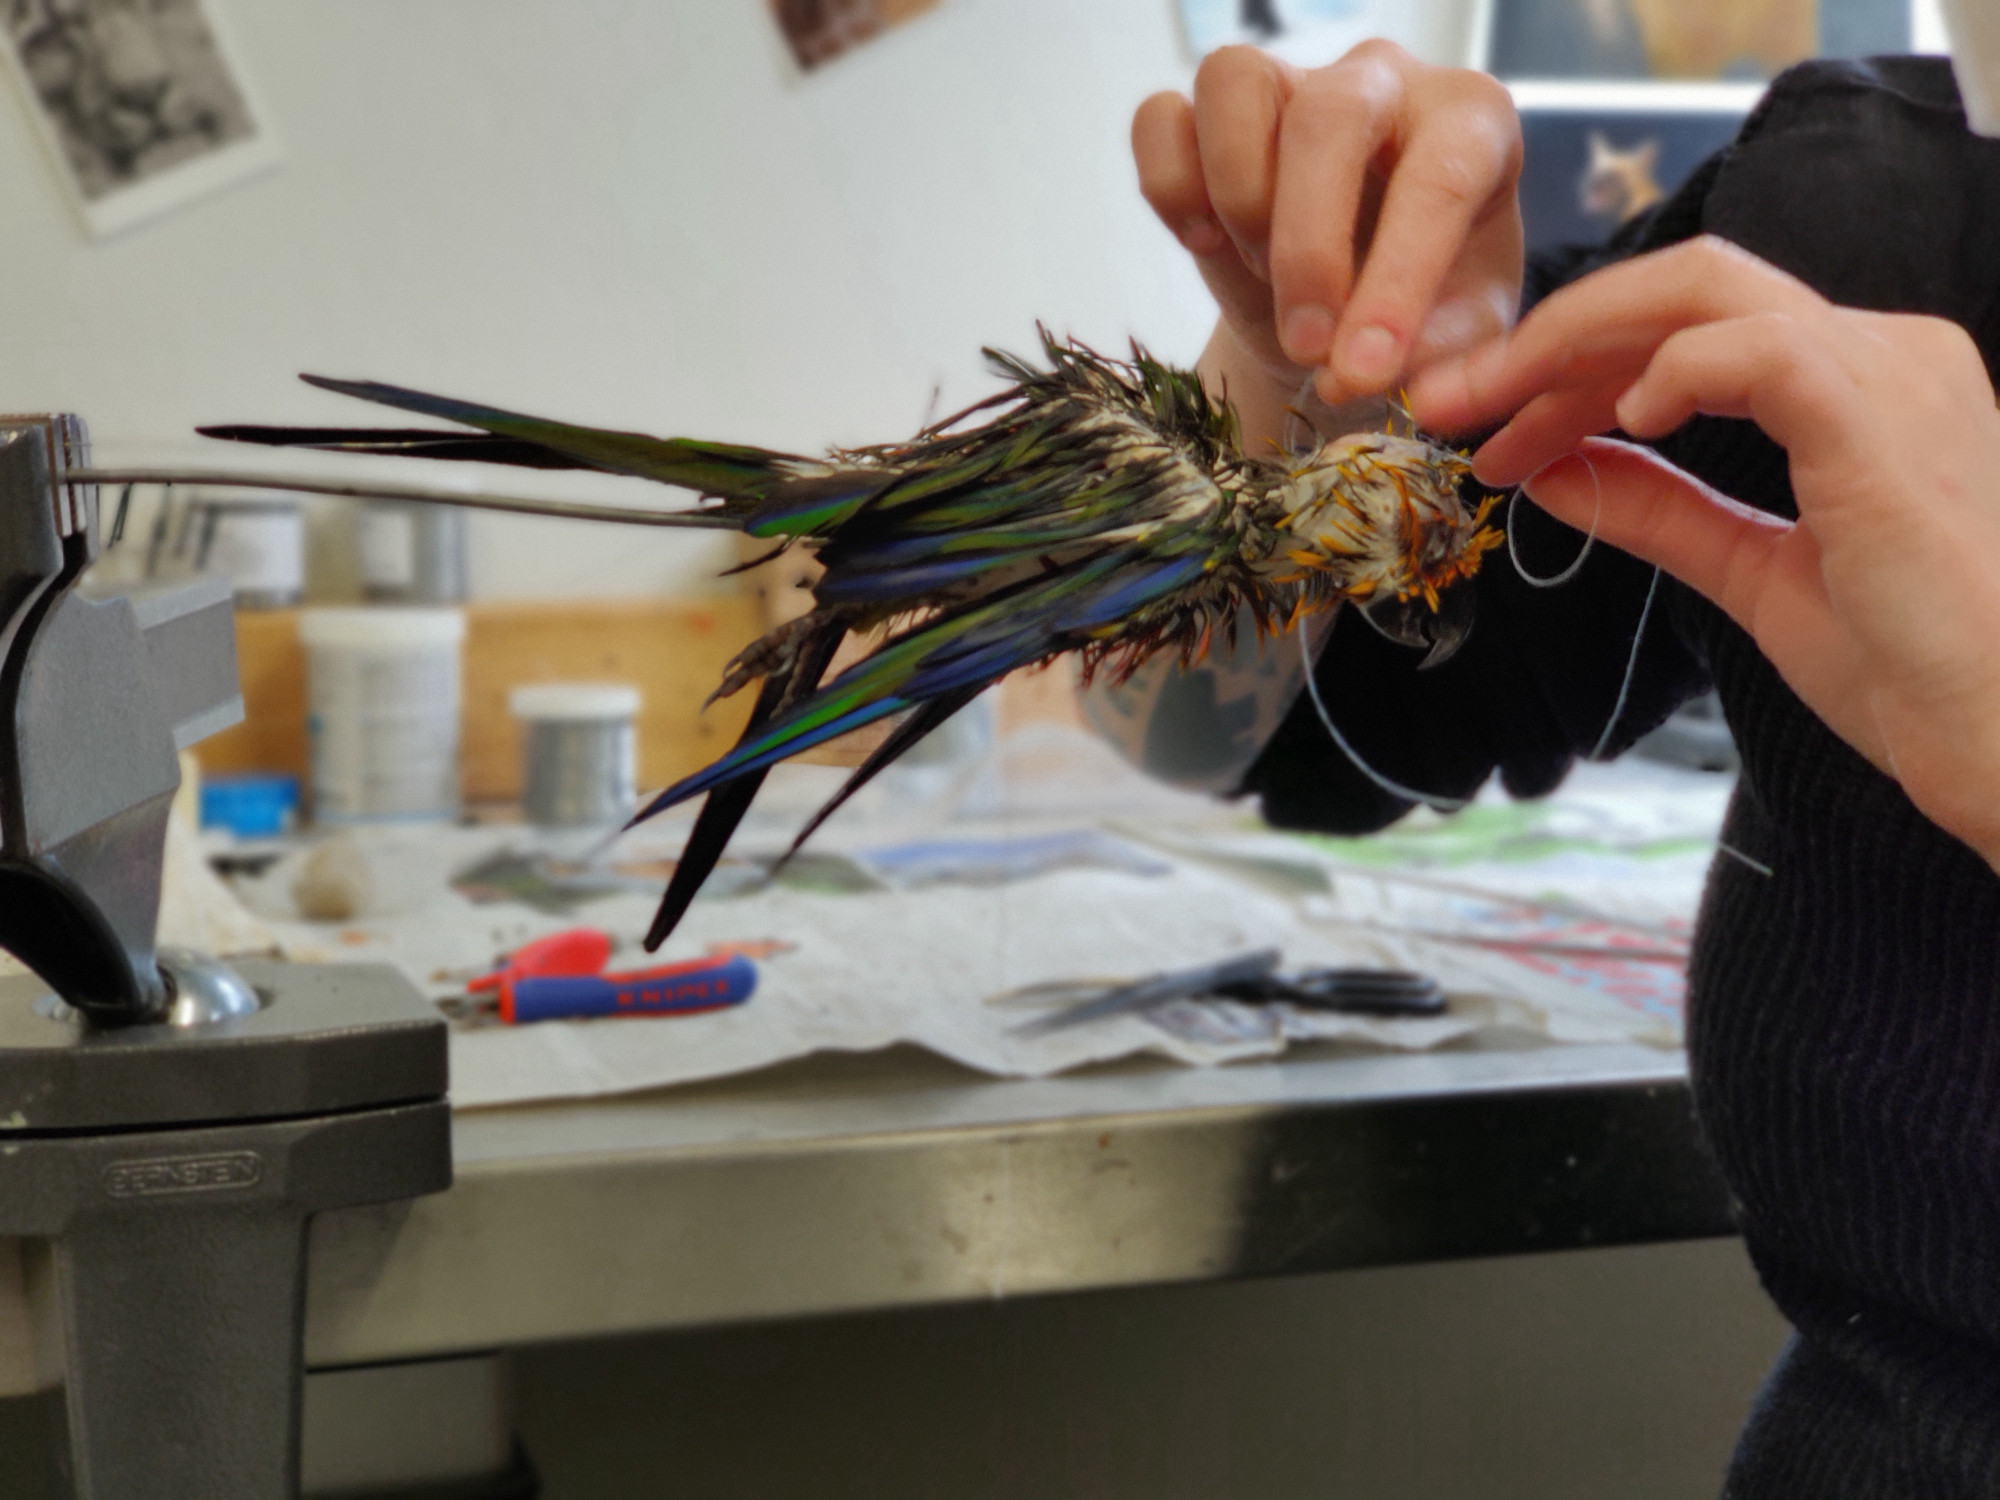 Close-up of the body of a dead bird with a metal handle that has been fixed in a bench vice. The feathers are wet and ruffled, revealing skin patches on its head. Two hands protrude into the image, sewing the animal's head using a needle and thread. There is a metal table in the background with newspaper and various objects on top of it.